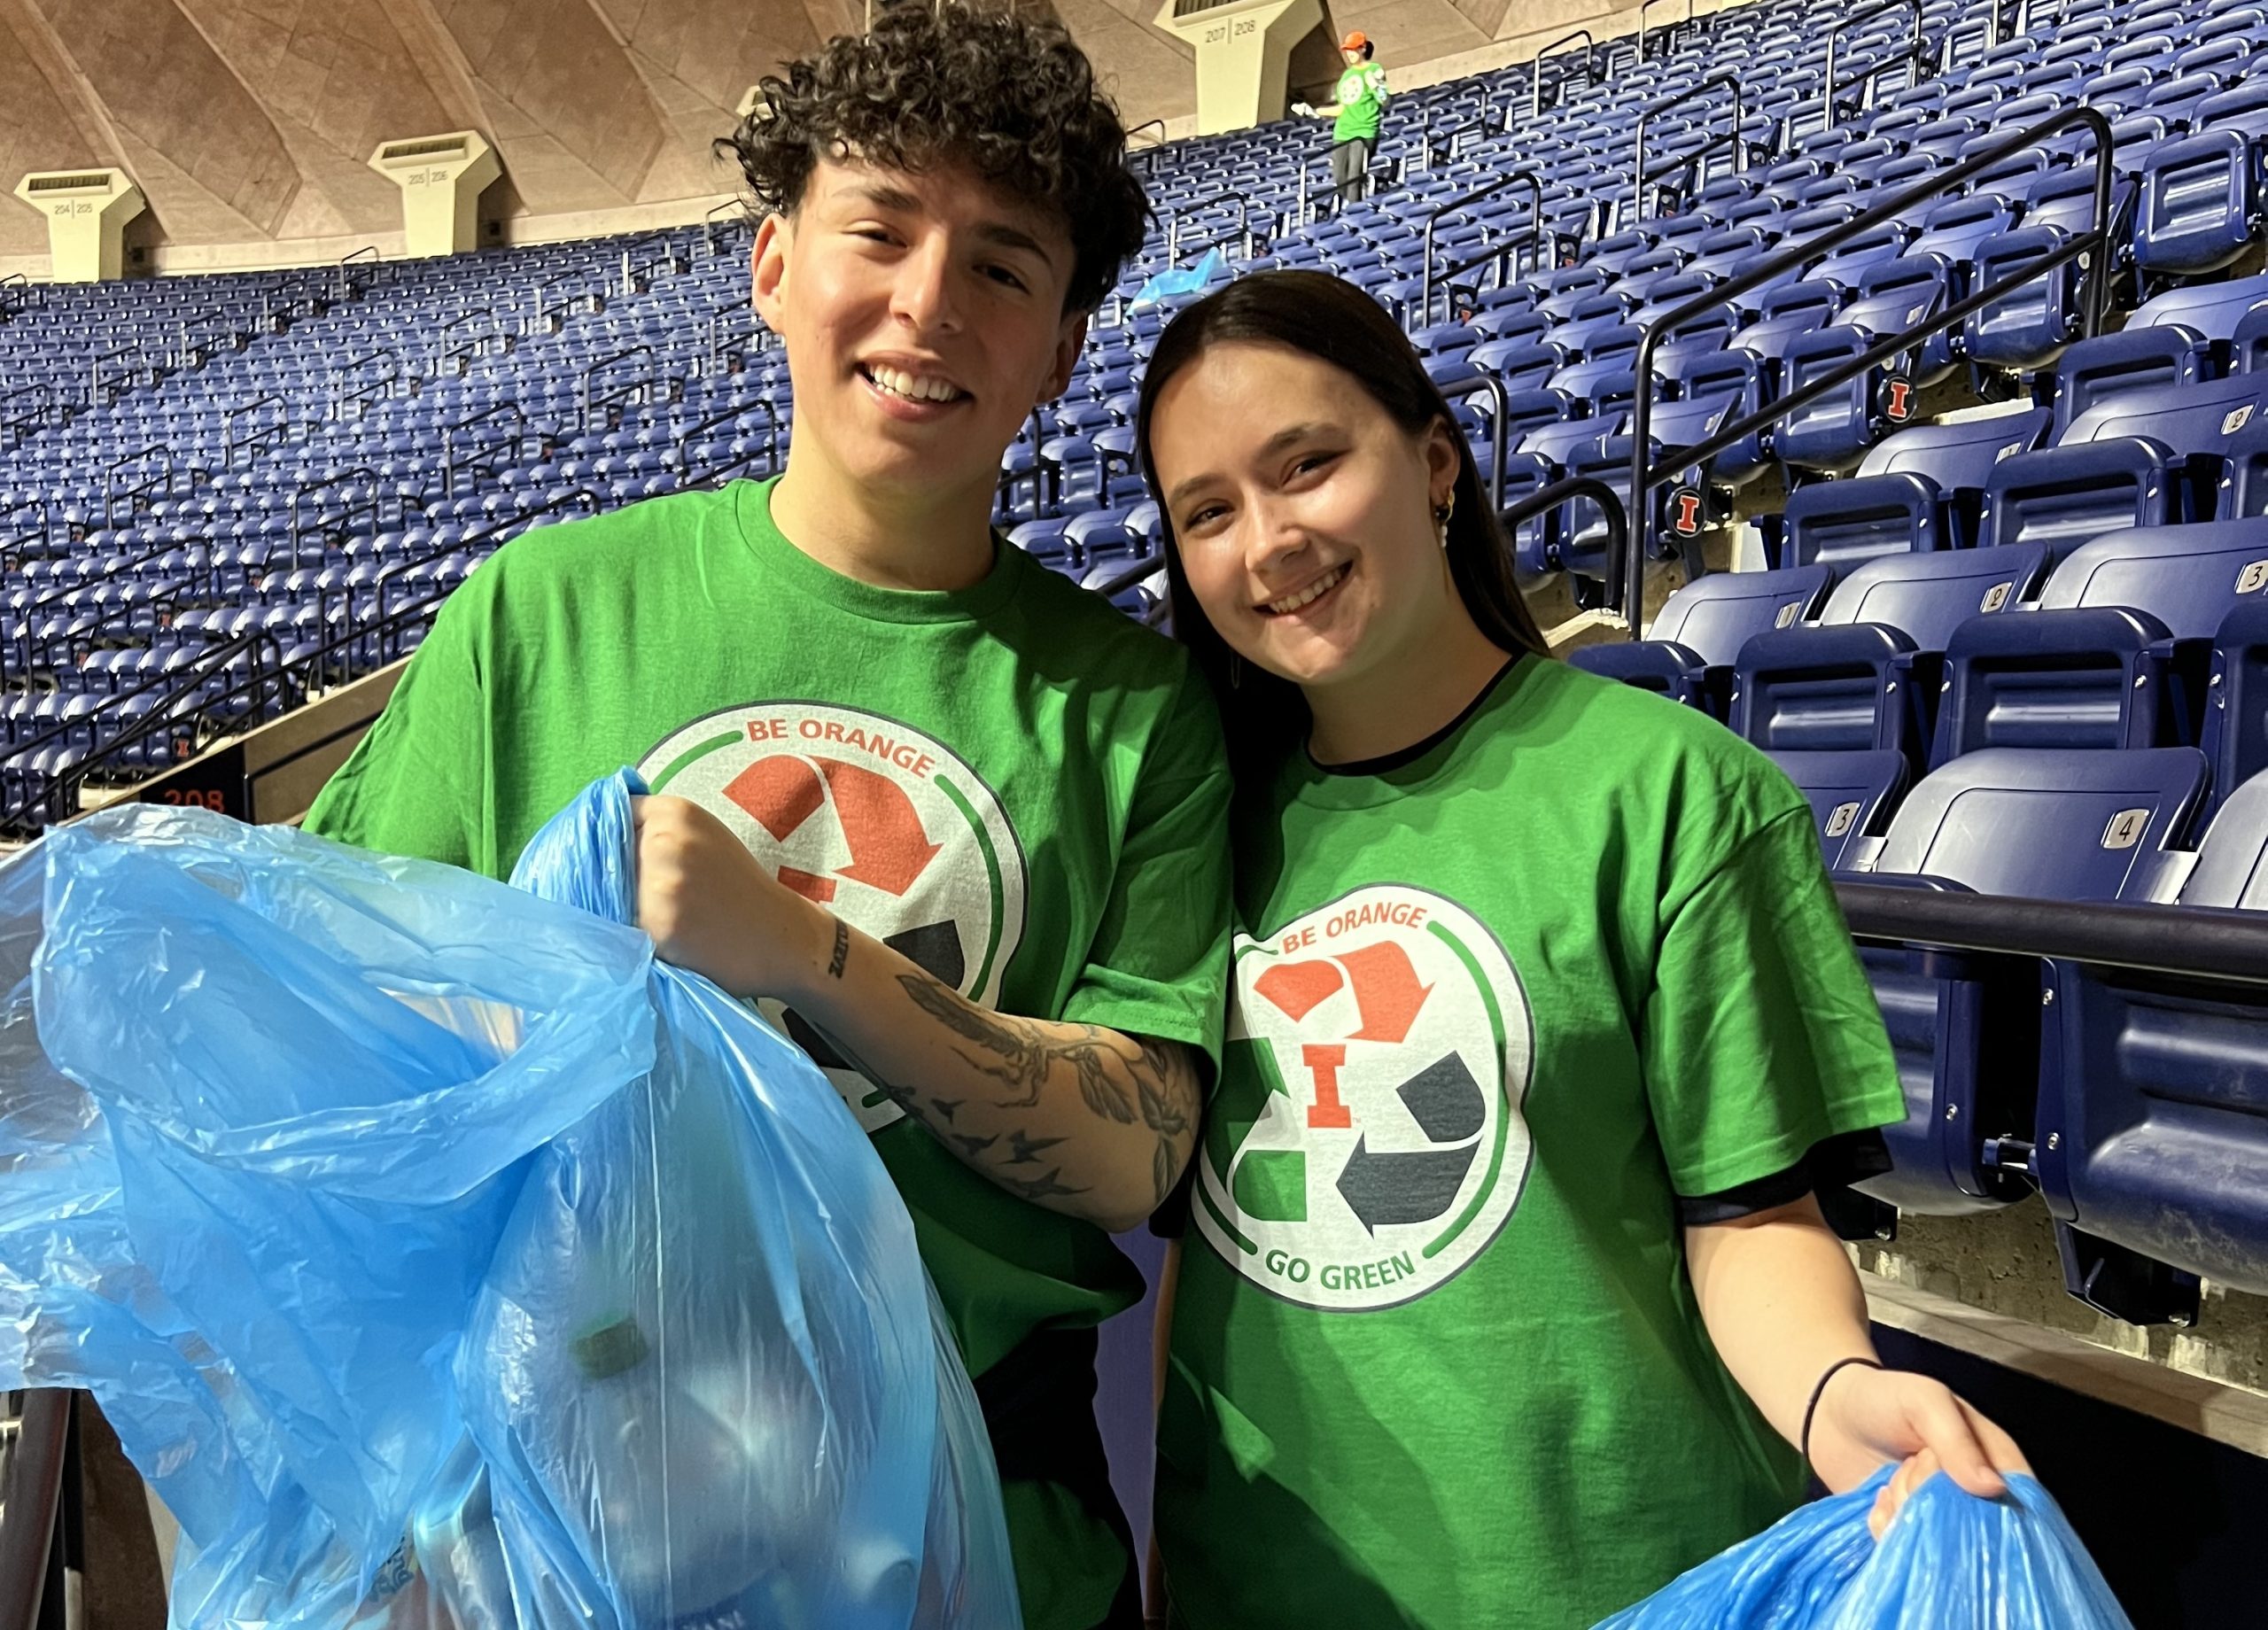 Zero waste volunteers at an Illinois basketball game at State Farm Center (SFC)